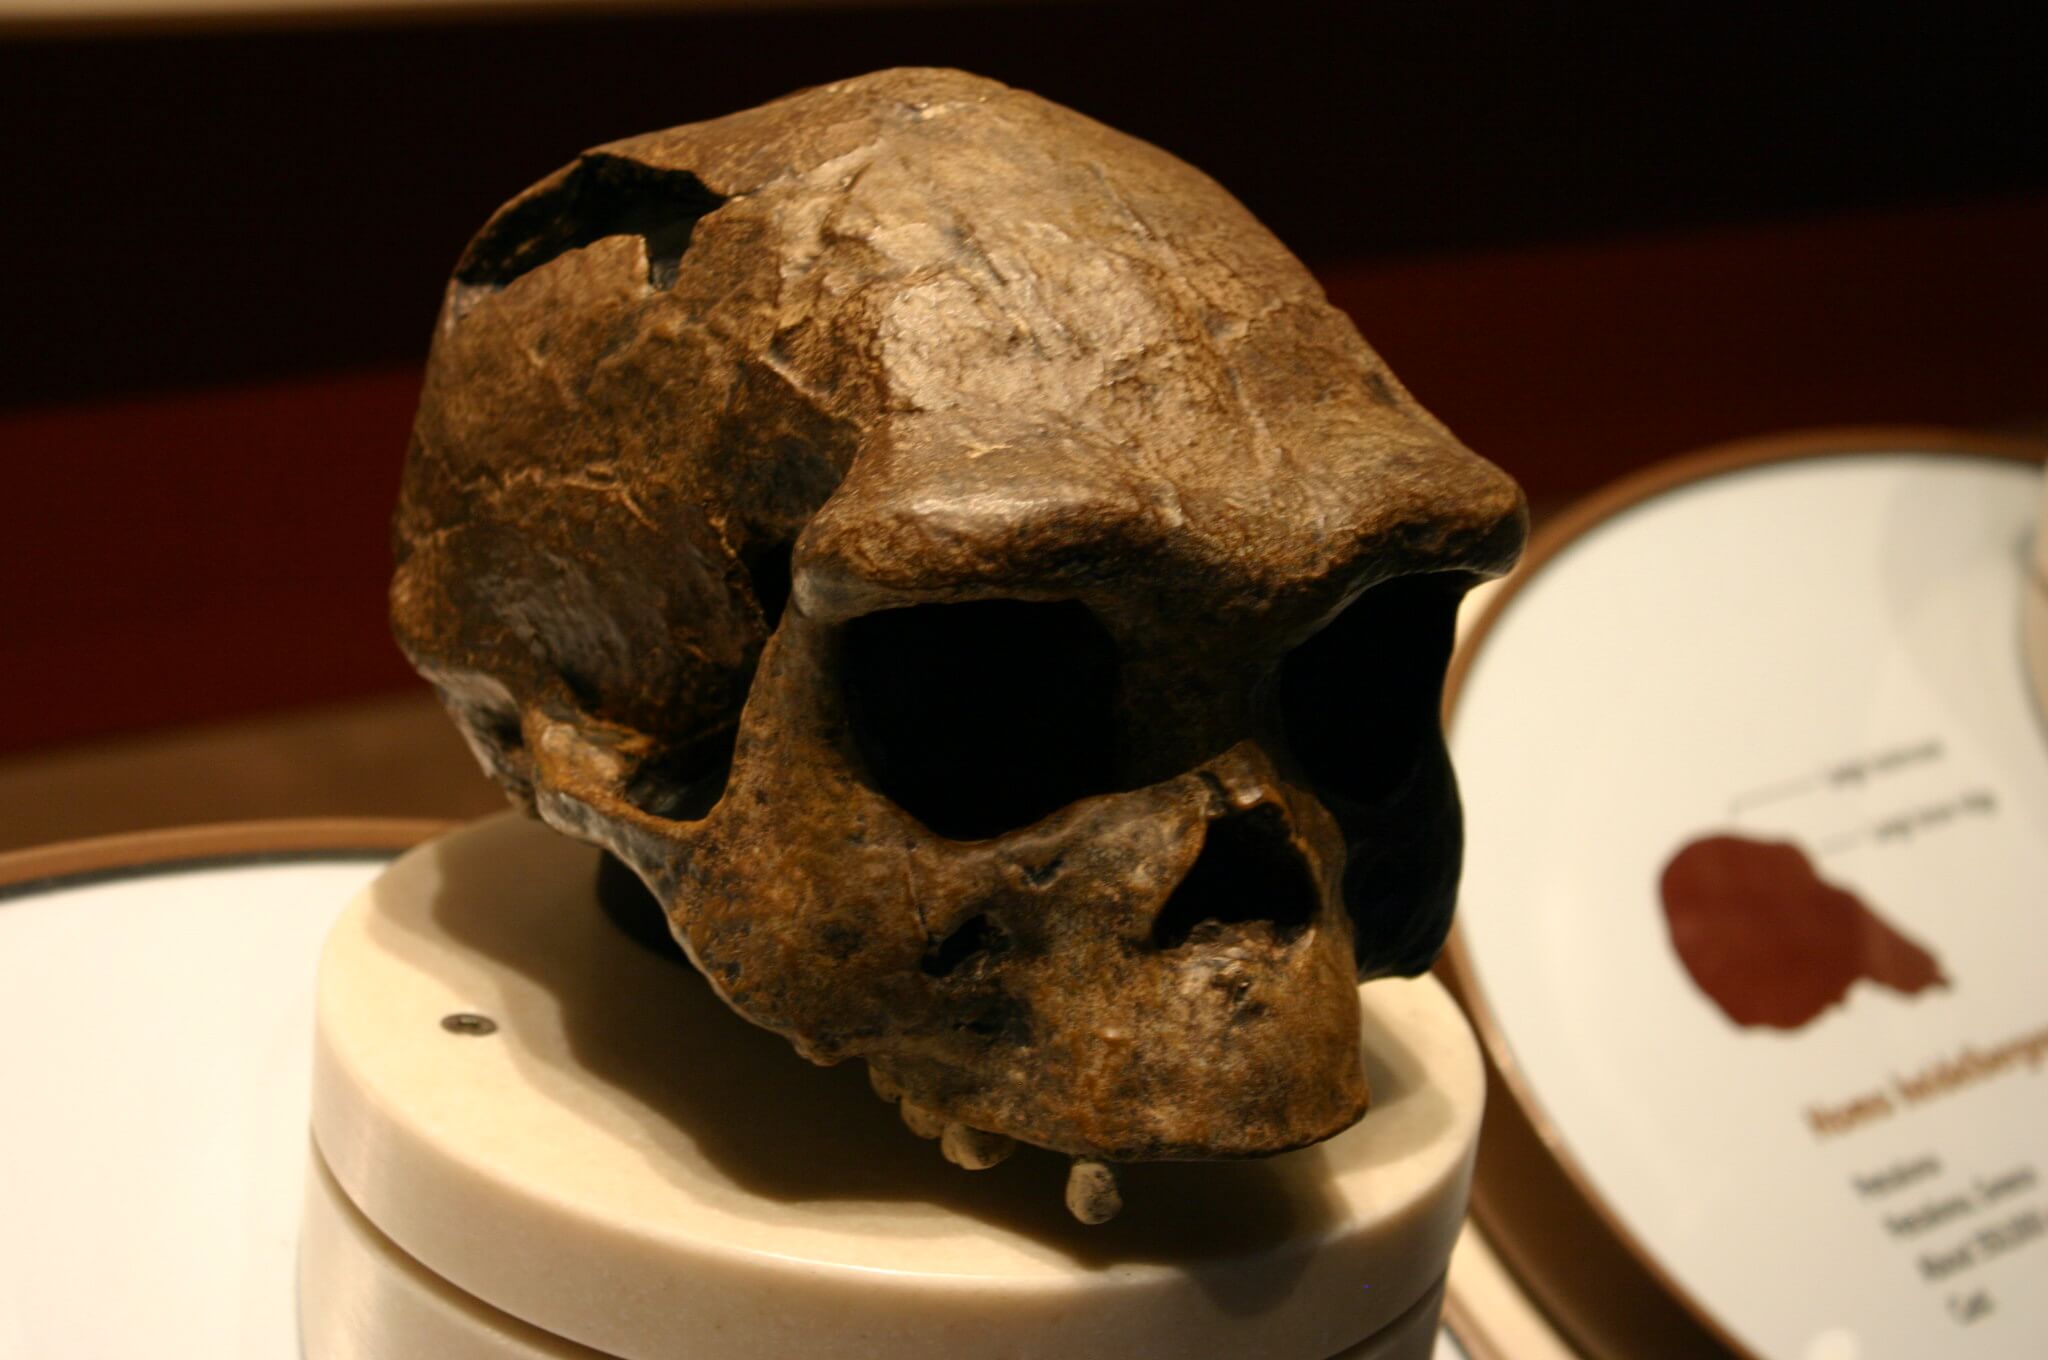 The skeleton from the Sima de los Huesos cave has been assigned to an early human species known as Homo heidelbergensis. However, researchers say the skeletal structure is similar to that of Neanderthals – so much so that some say the Sima de los Huesos people were actually Neanderthals rather than representatives of Homo heidelbergensis. ©World History Encyclopaedia